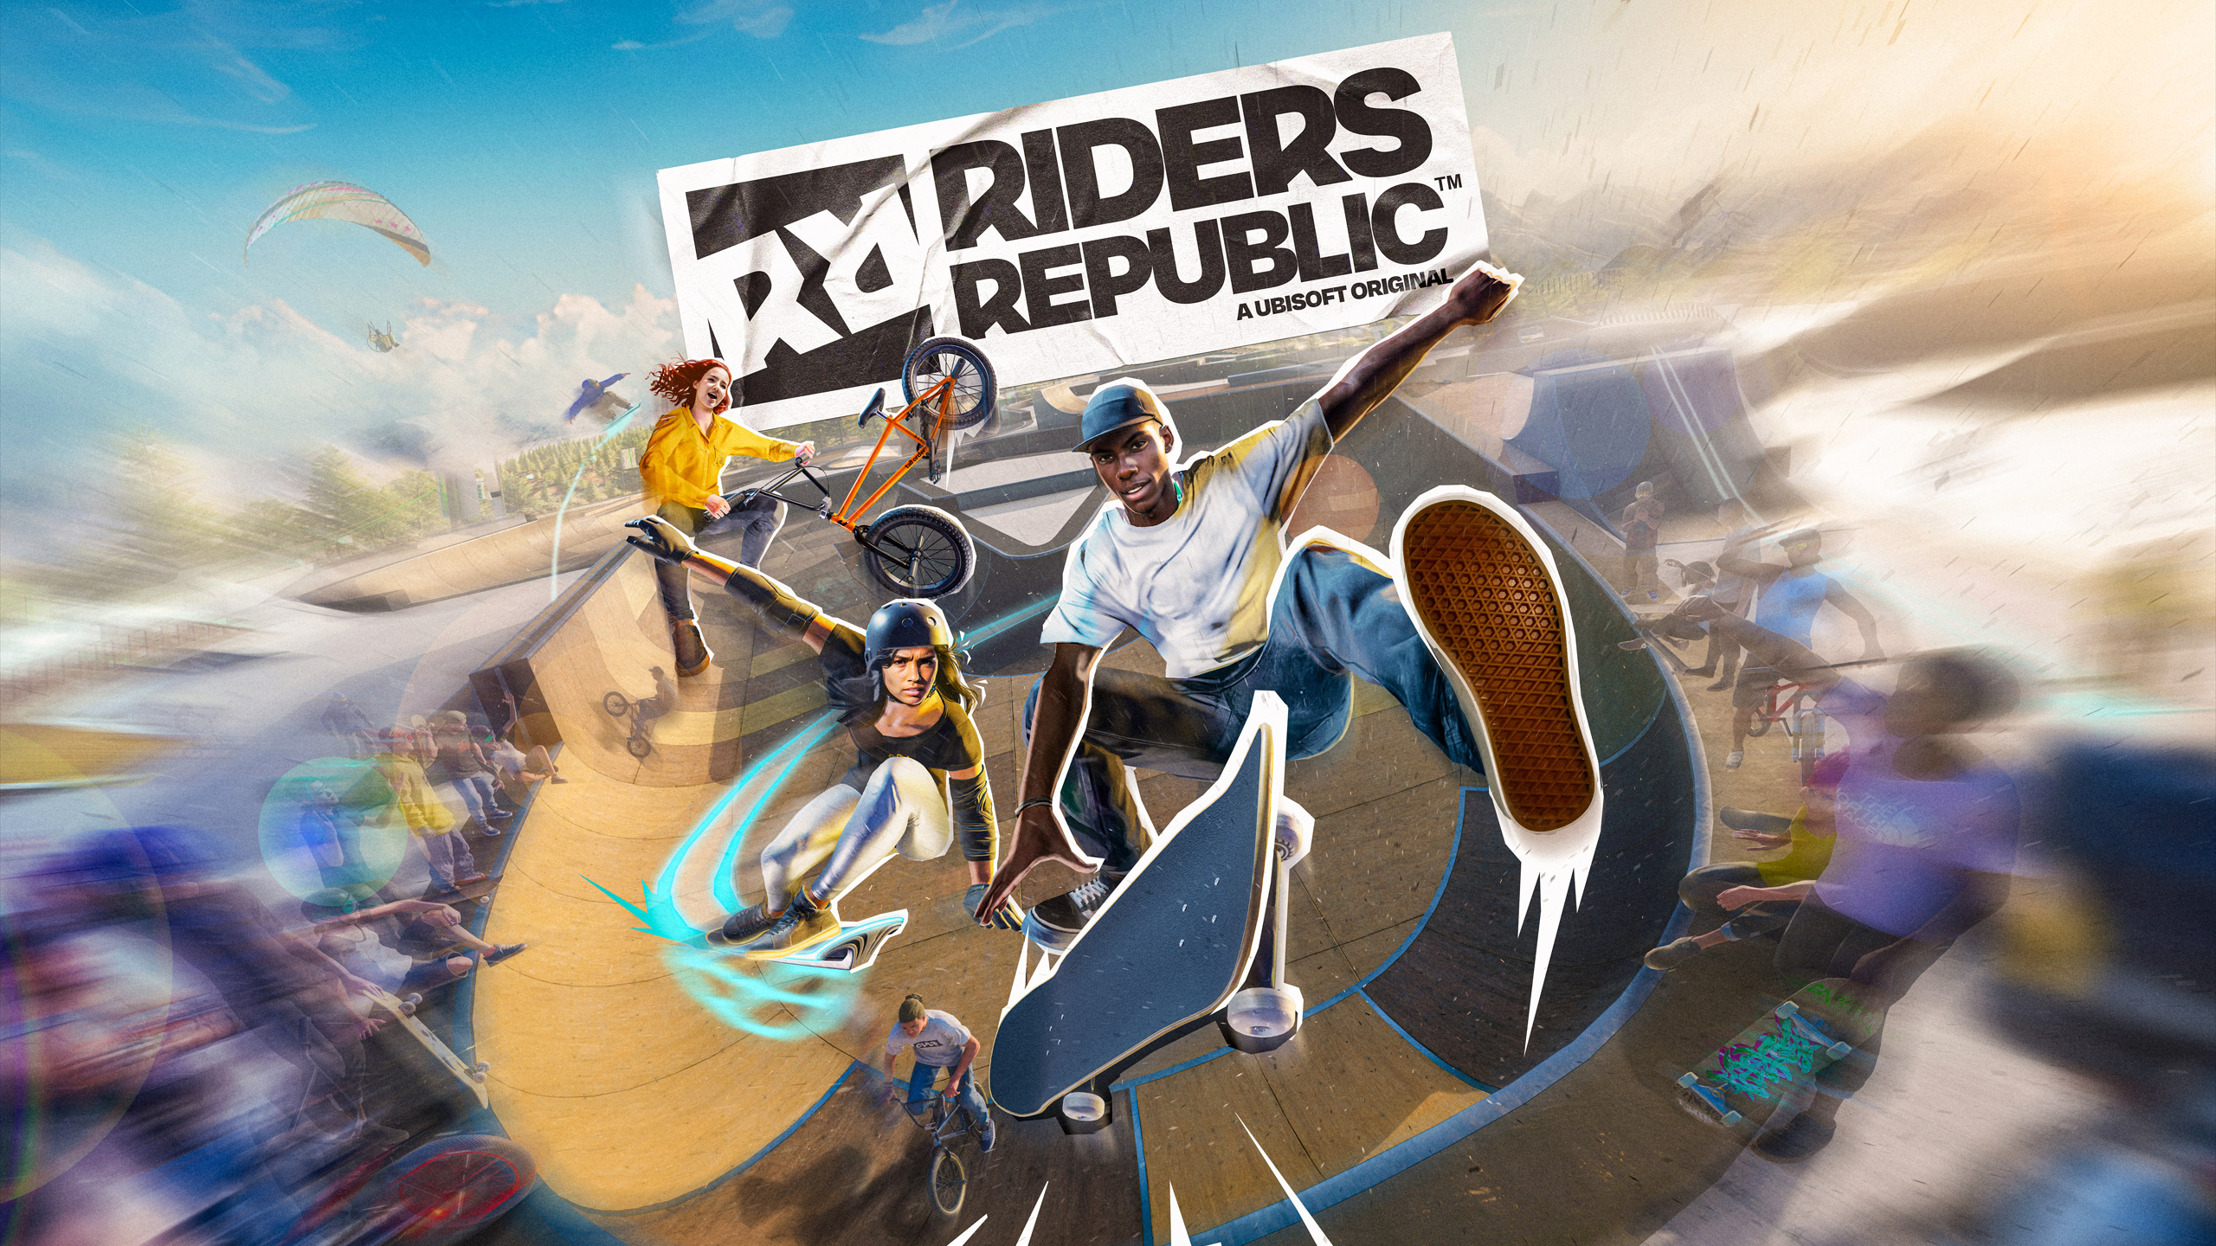 Preview: Riders Republic™ Skate Add-On ab morgen spielbar!